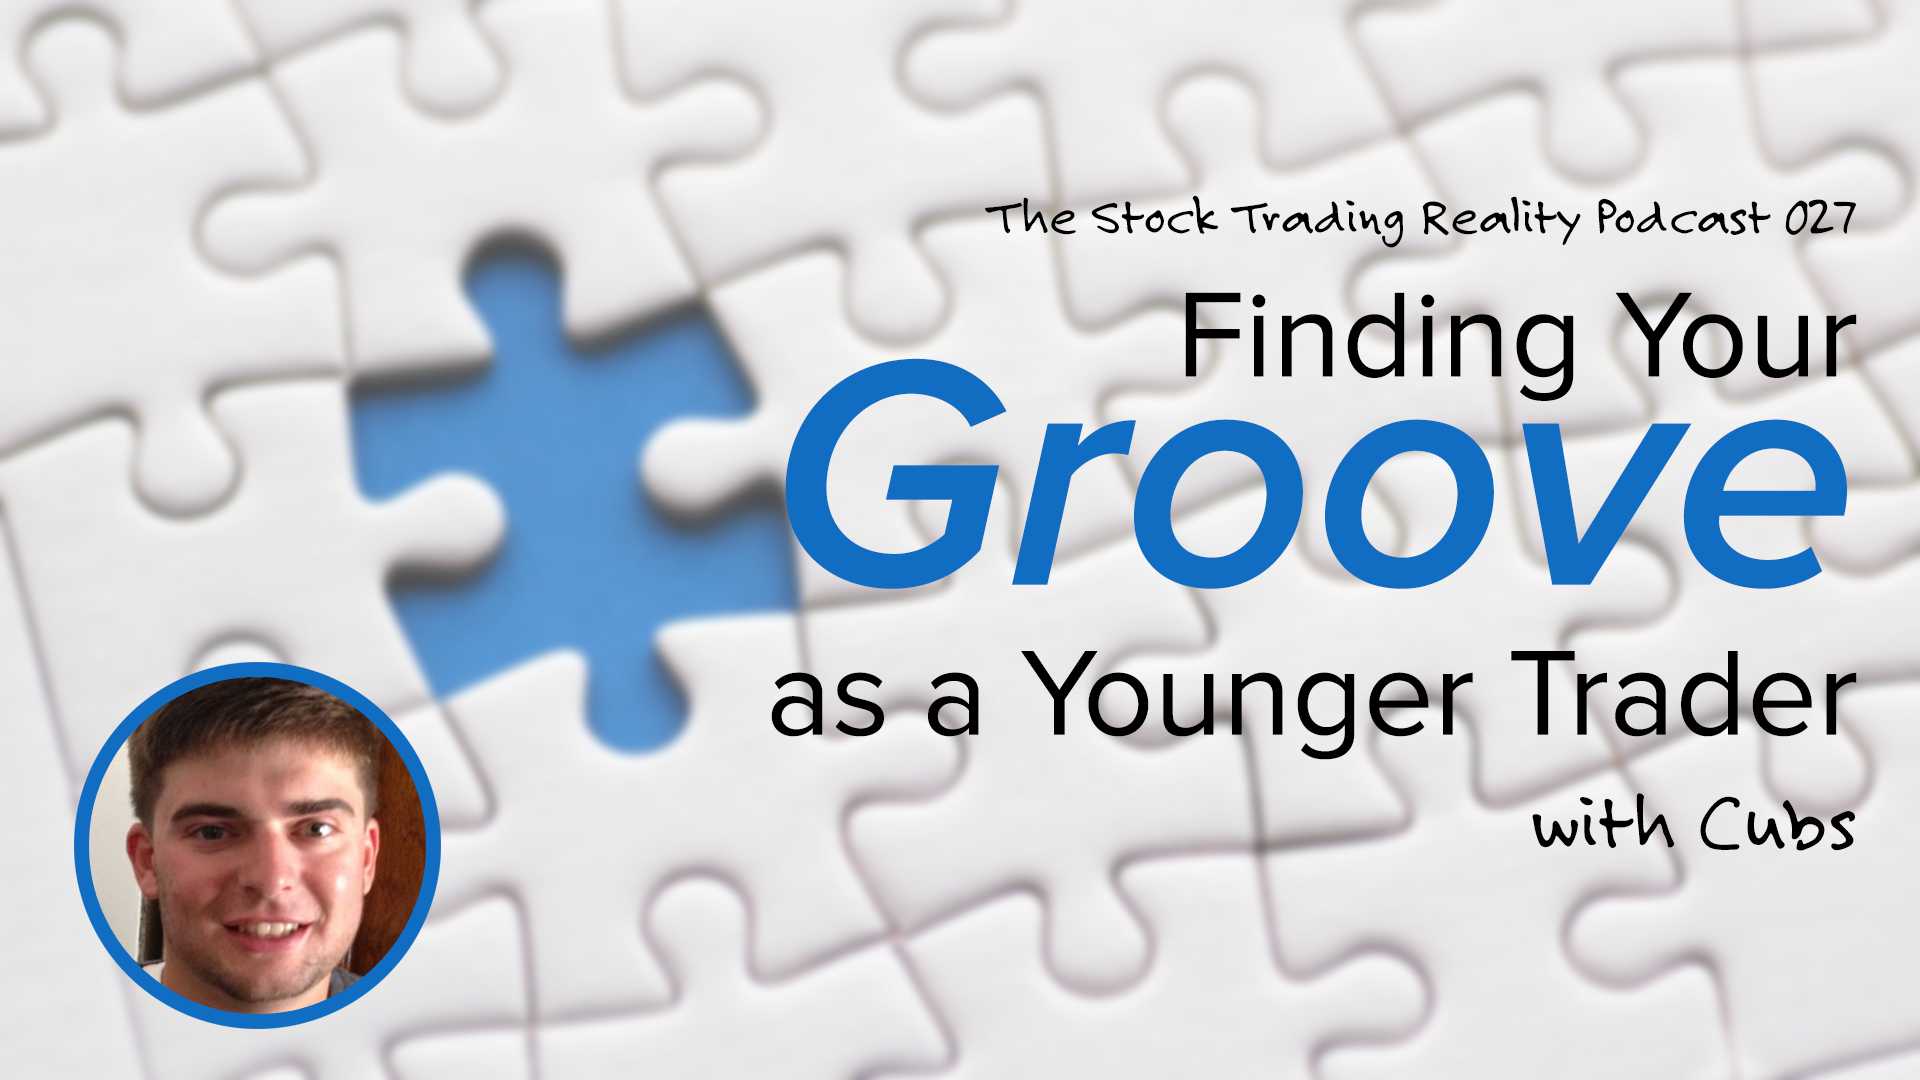 STR 027: Finding Your Groove as a Younger Trader